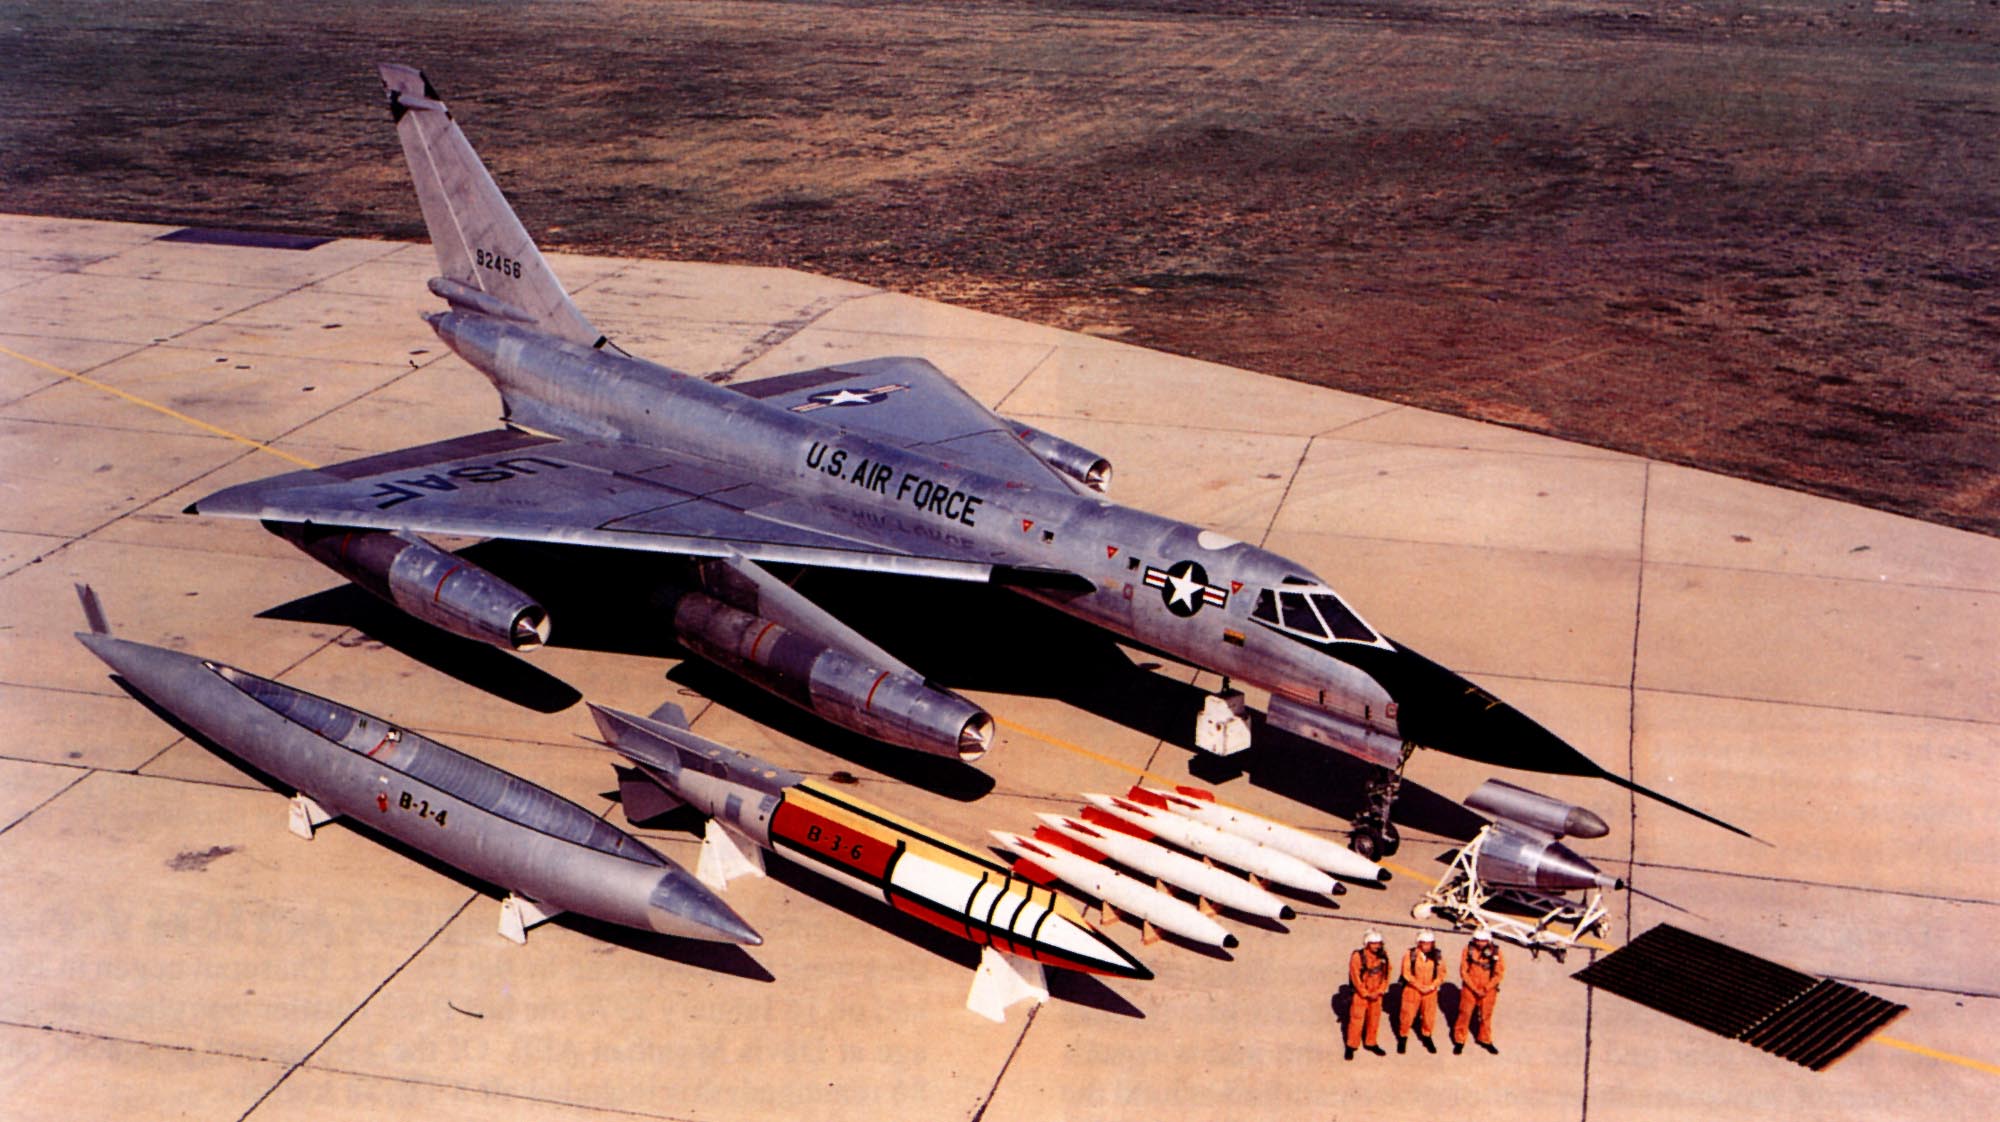 FAI altitiude record setting Convair B-58A-10-CF 59-2456, showing the bomber's weapons capability. (U.S. Air Force) 